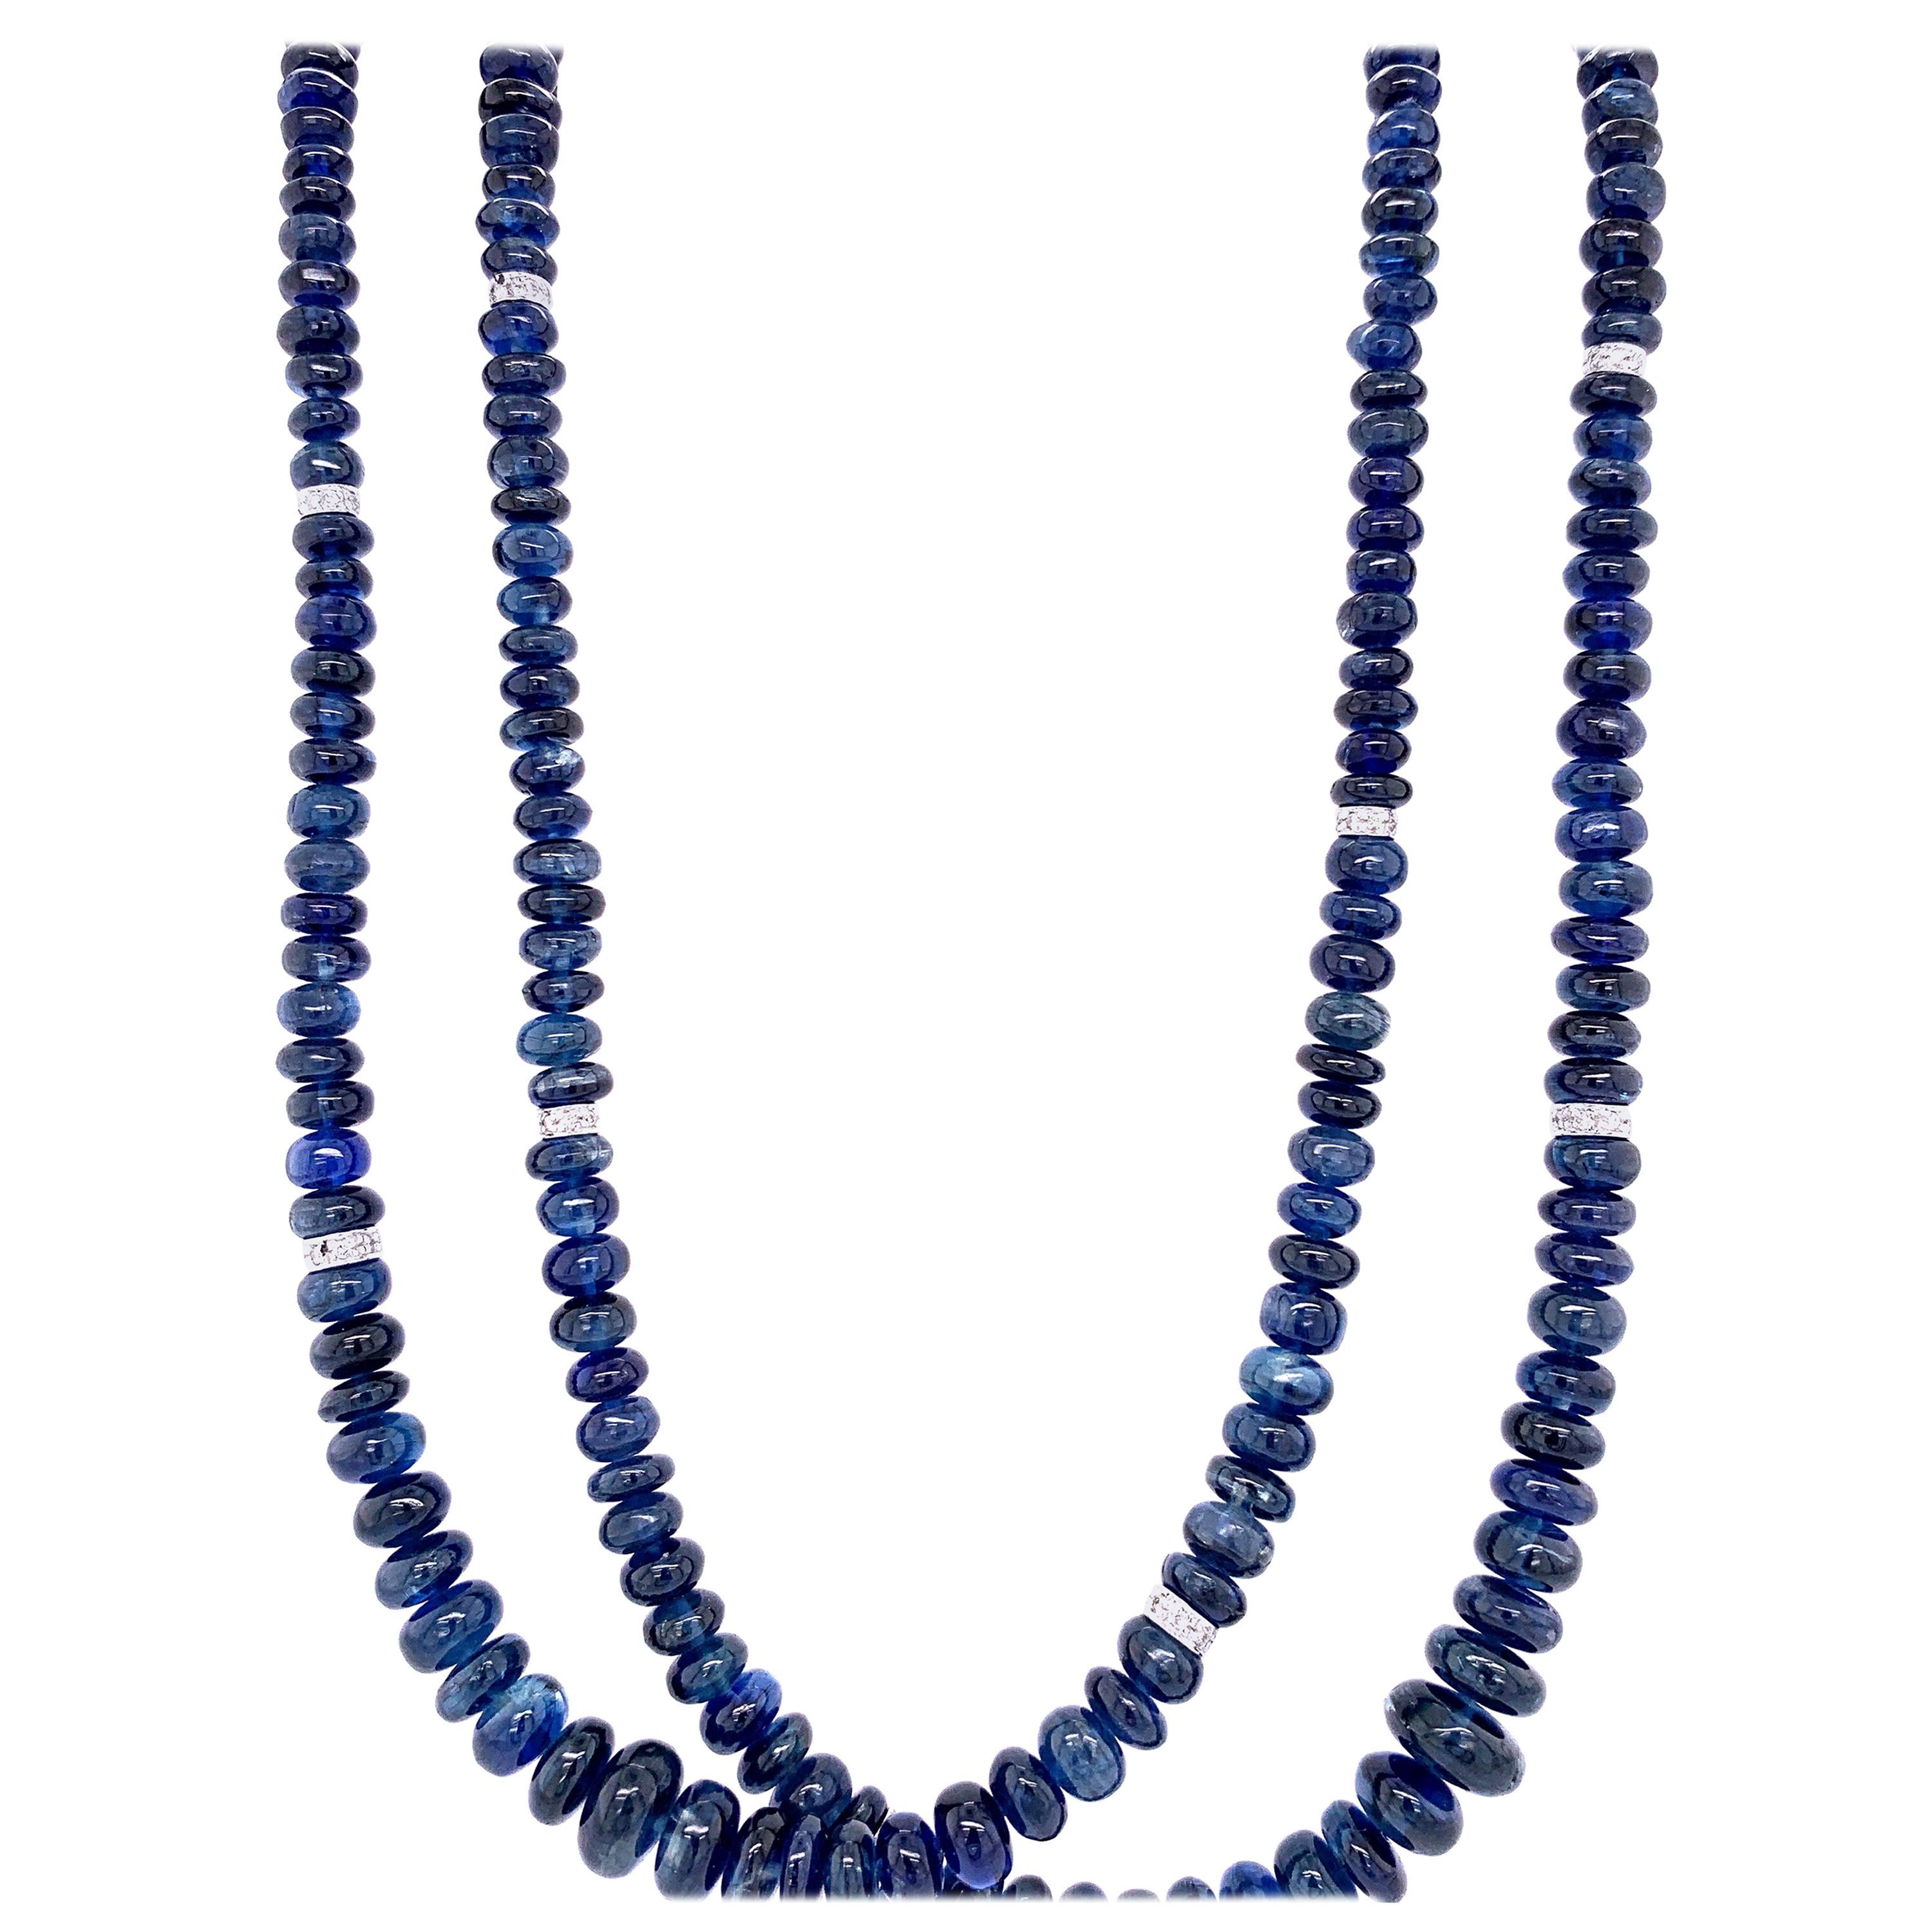 EXCELLENT DESIGN 394.00 CTS NATURAL 3 LINE CARVED BLUE SAPPHIRE BEADS NECKLACE 